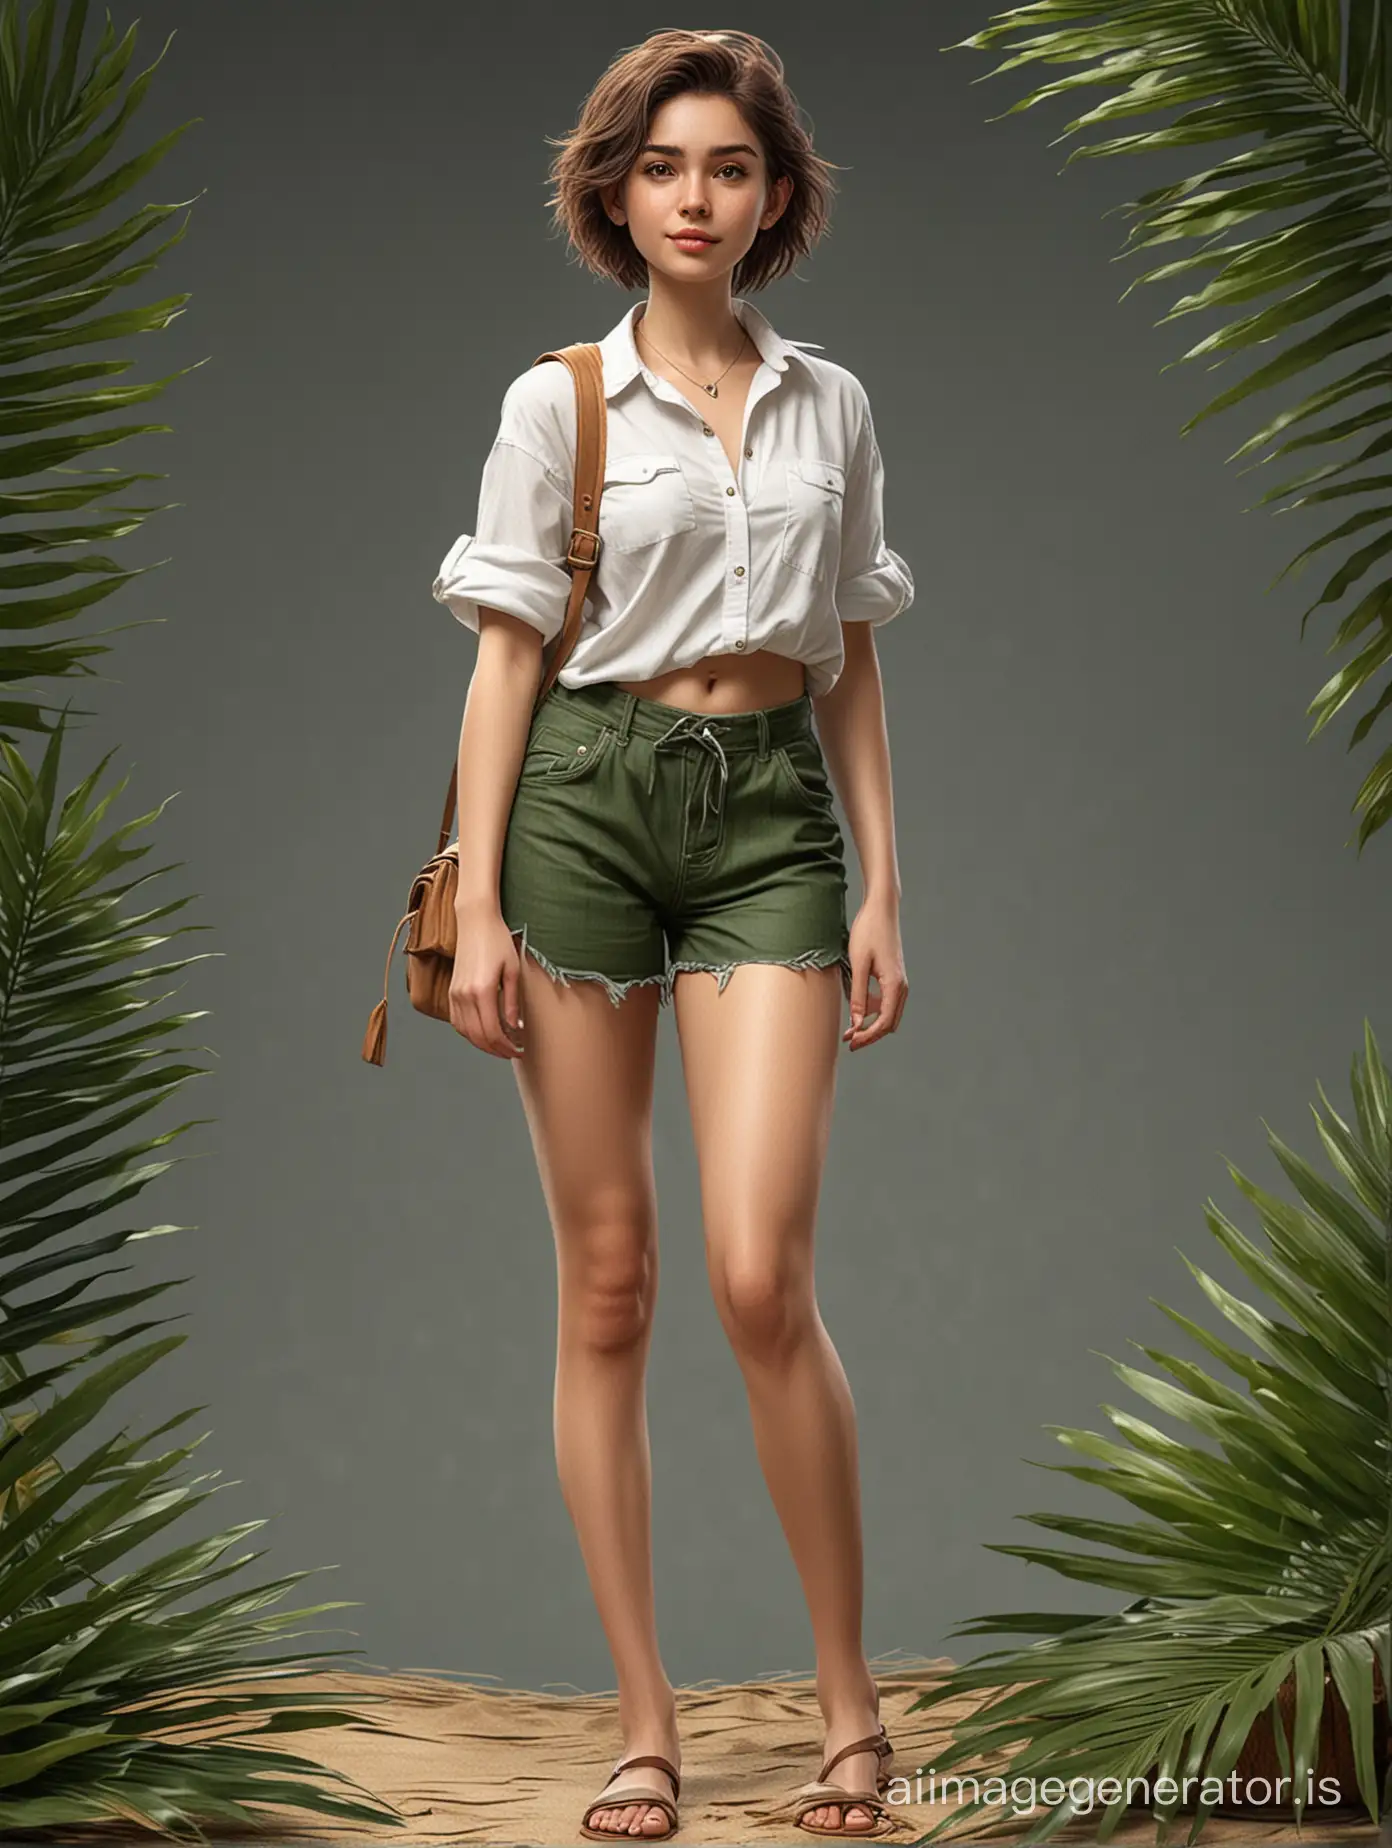 Modern-Female-Character-Inspired-by-Coconut-Leaves-in-High-Resolution-Digital-Art